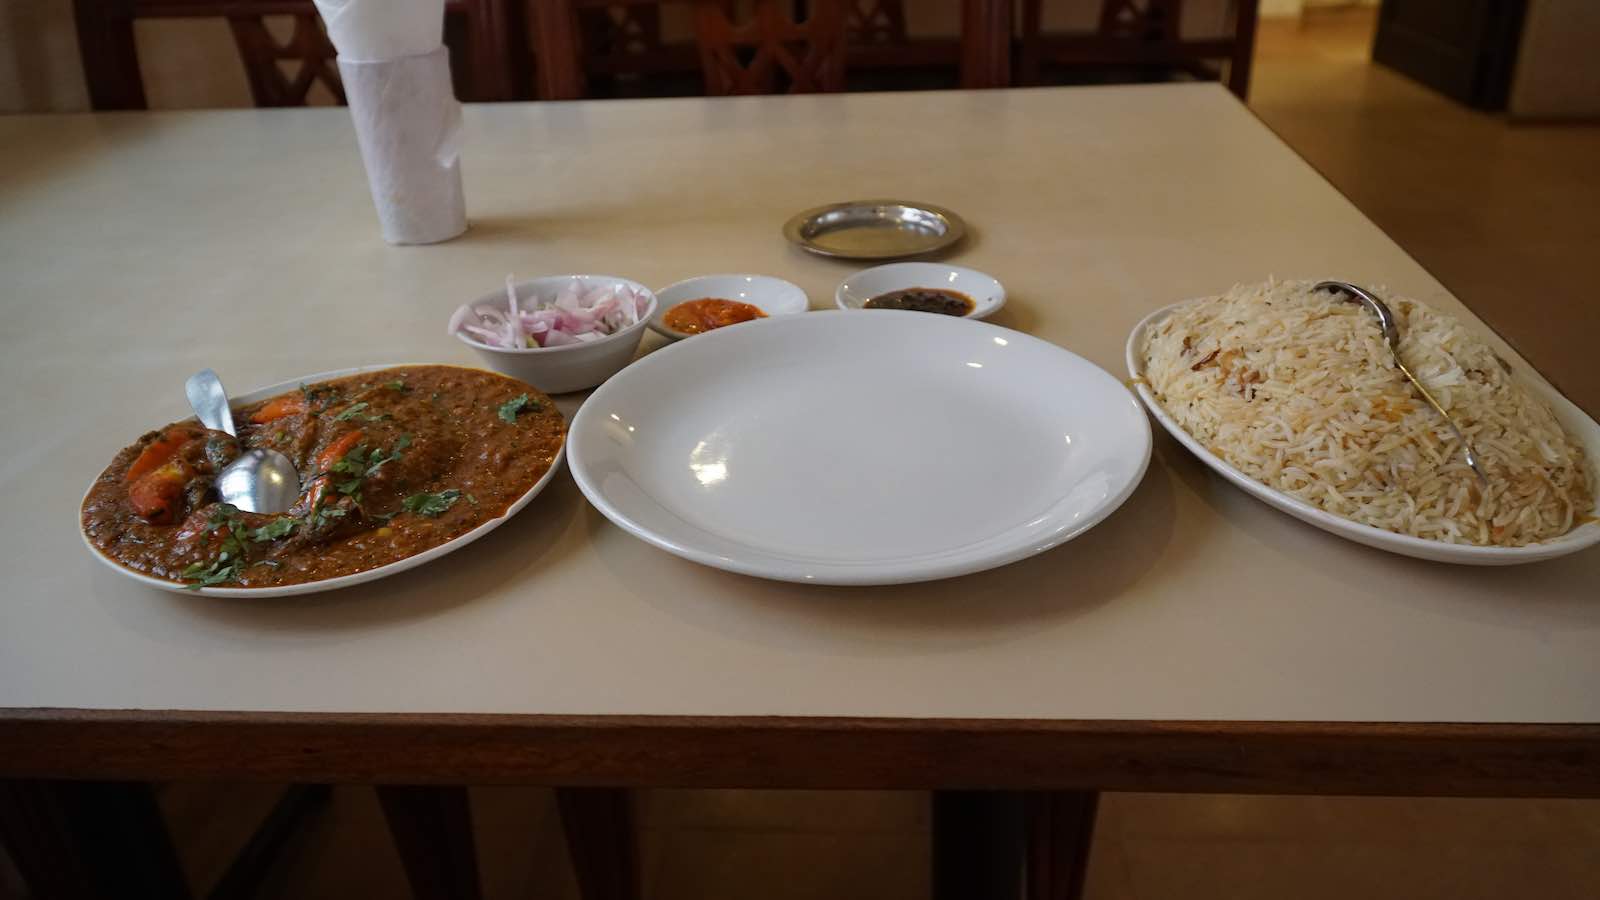 Got some fish curry and biriyani for a late lunch before I went back to rest. It was extremely filling and flavorful.